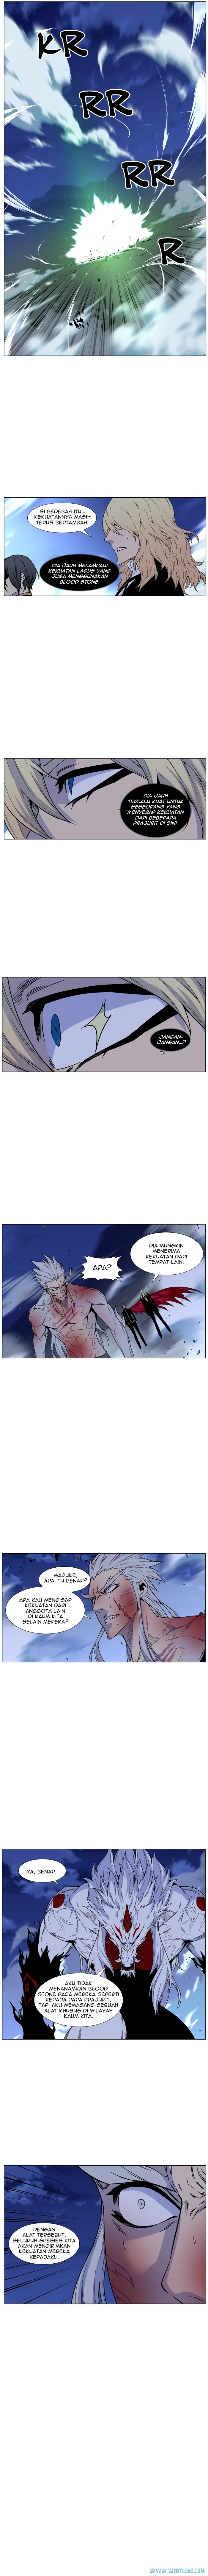 Noblesse Chapter 468 - 89